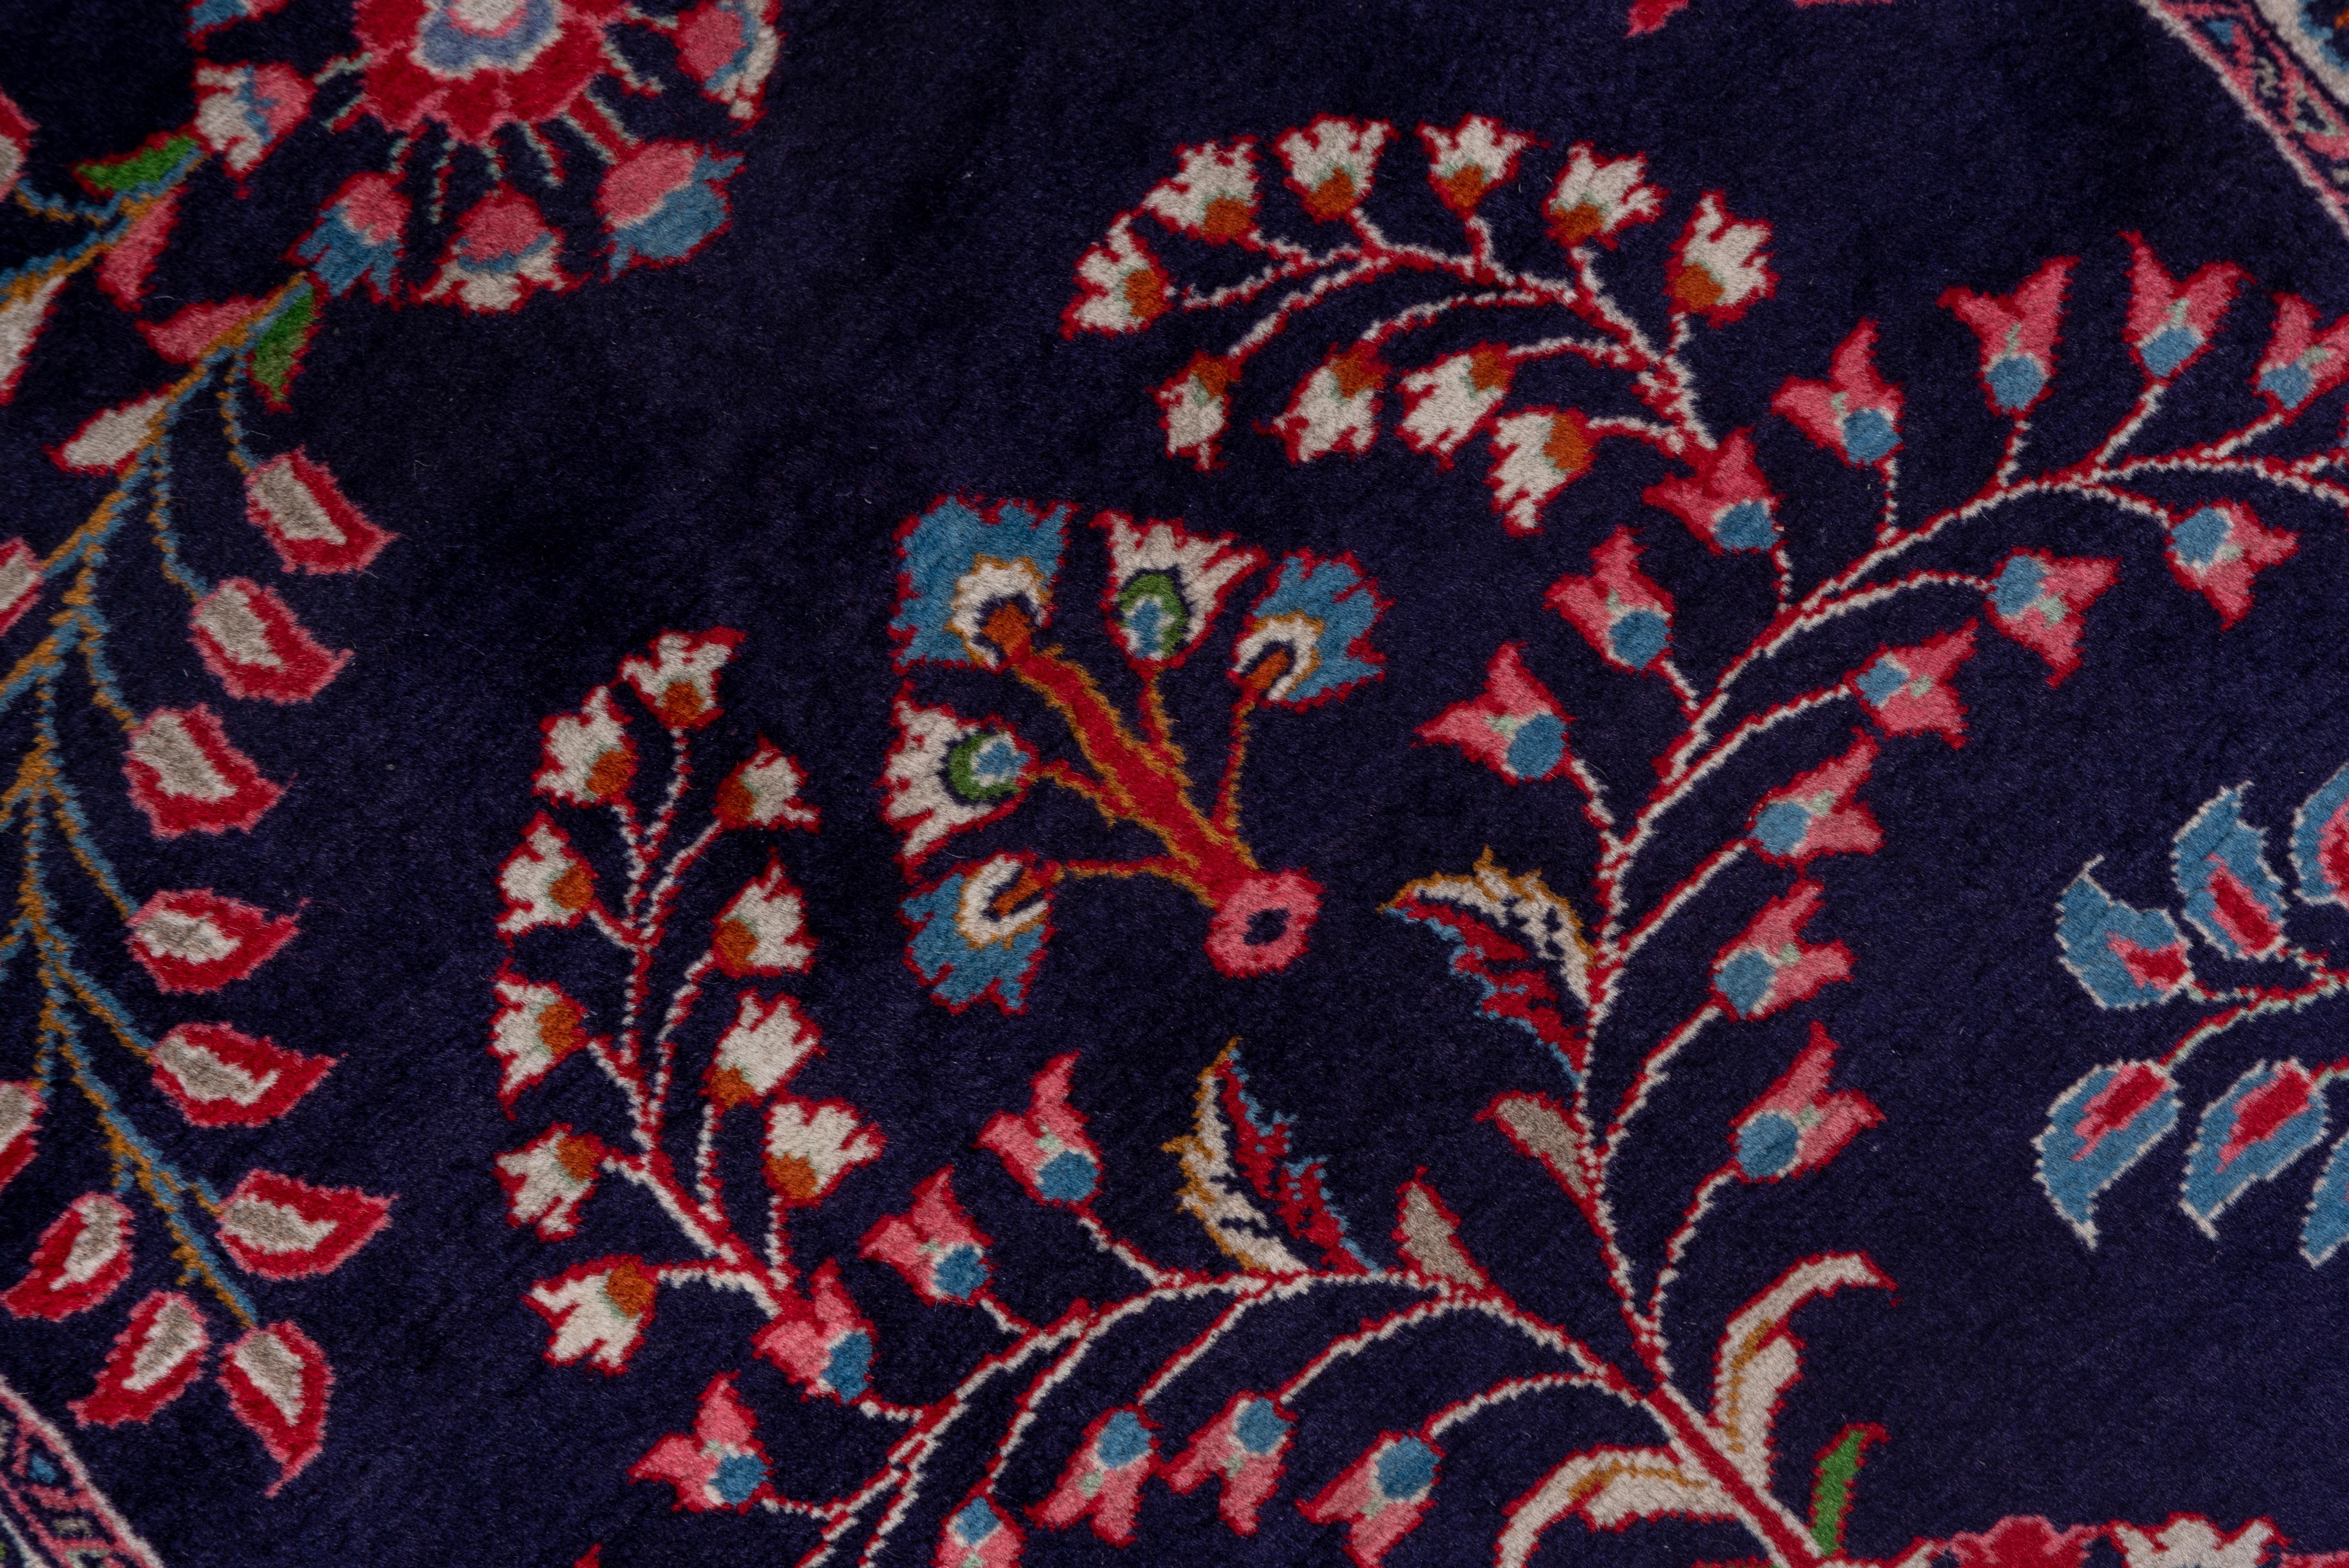 Wool Mid-20th Century Persian Sarouk Runner, Navy Field, Red Accents, circa 1950s